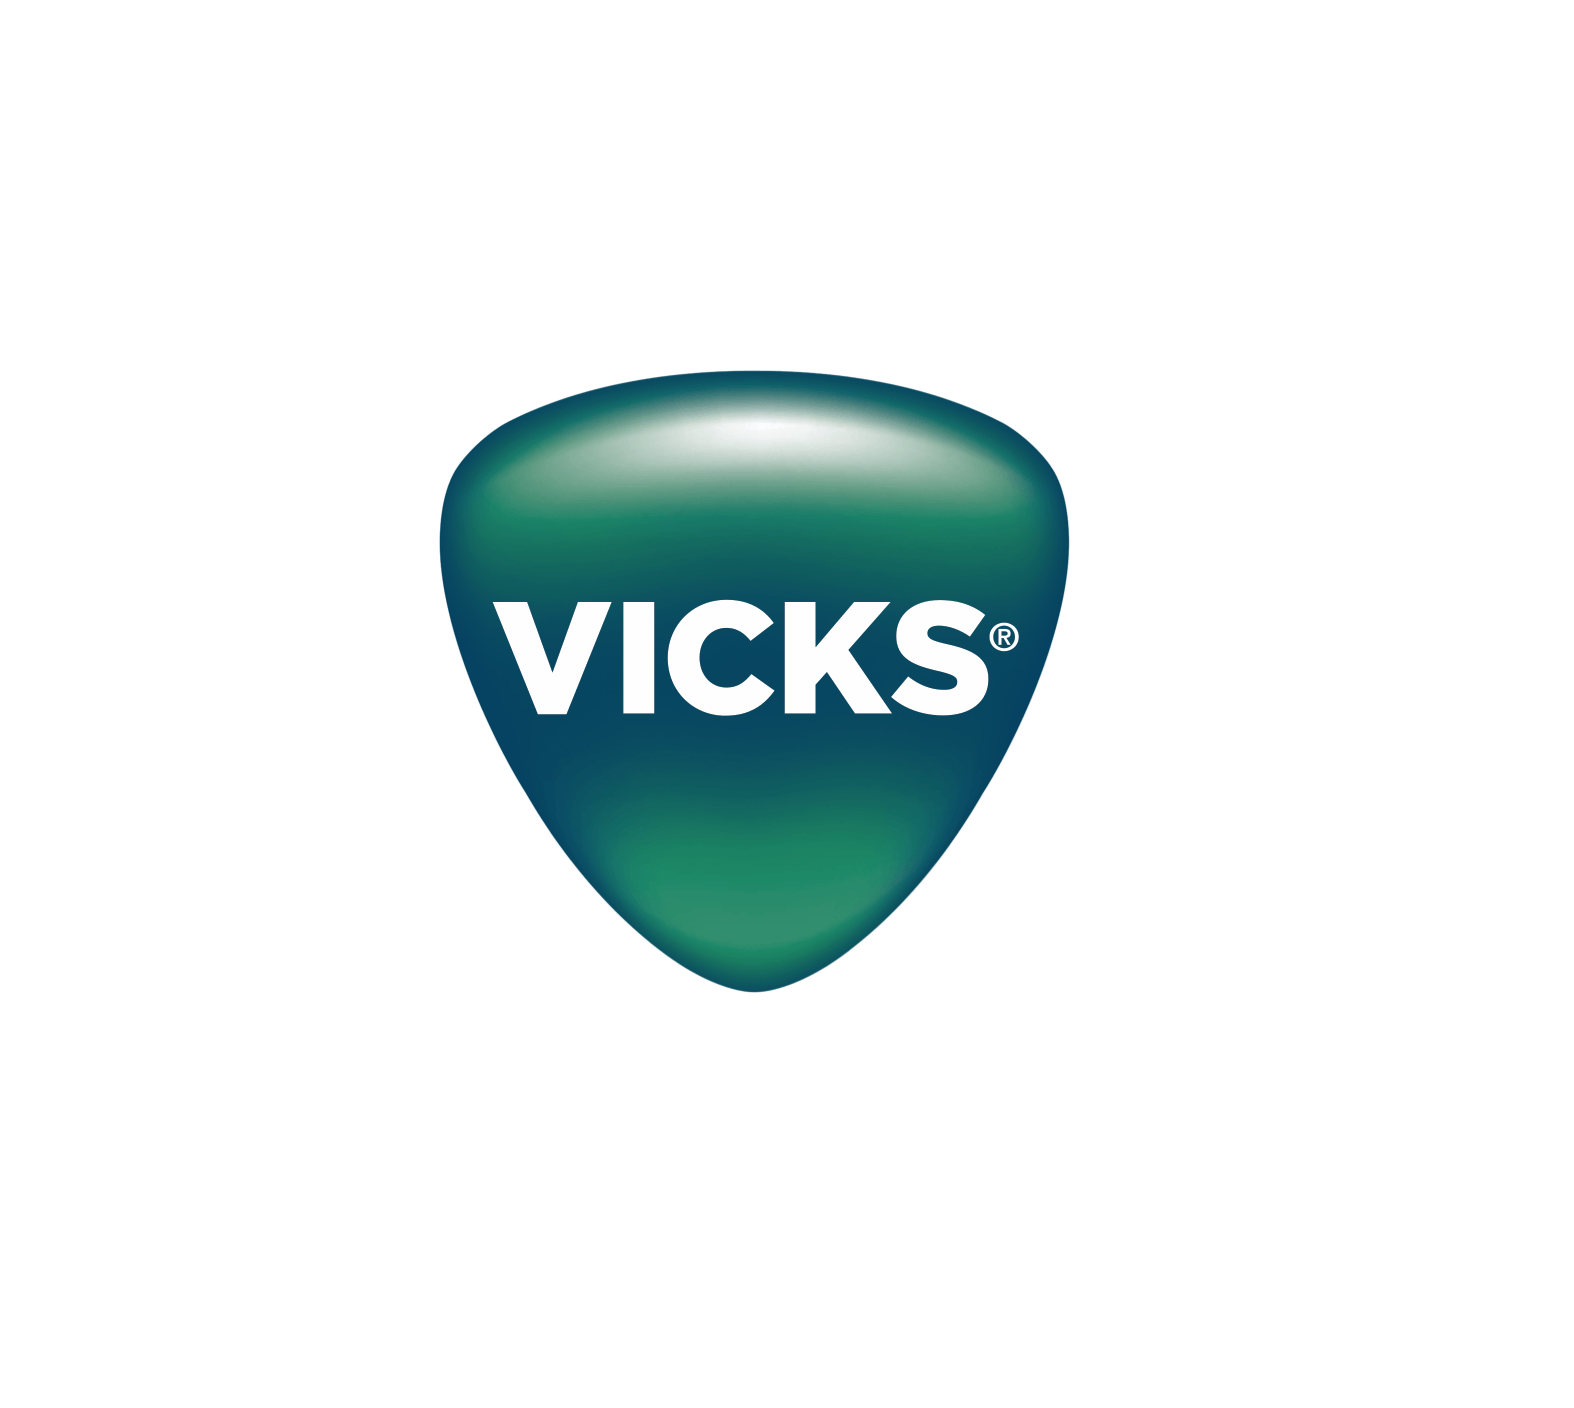 Vicks Logo - Did you get your High Value Coupons for VapoRub products